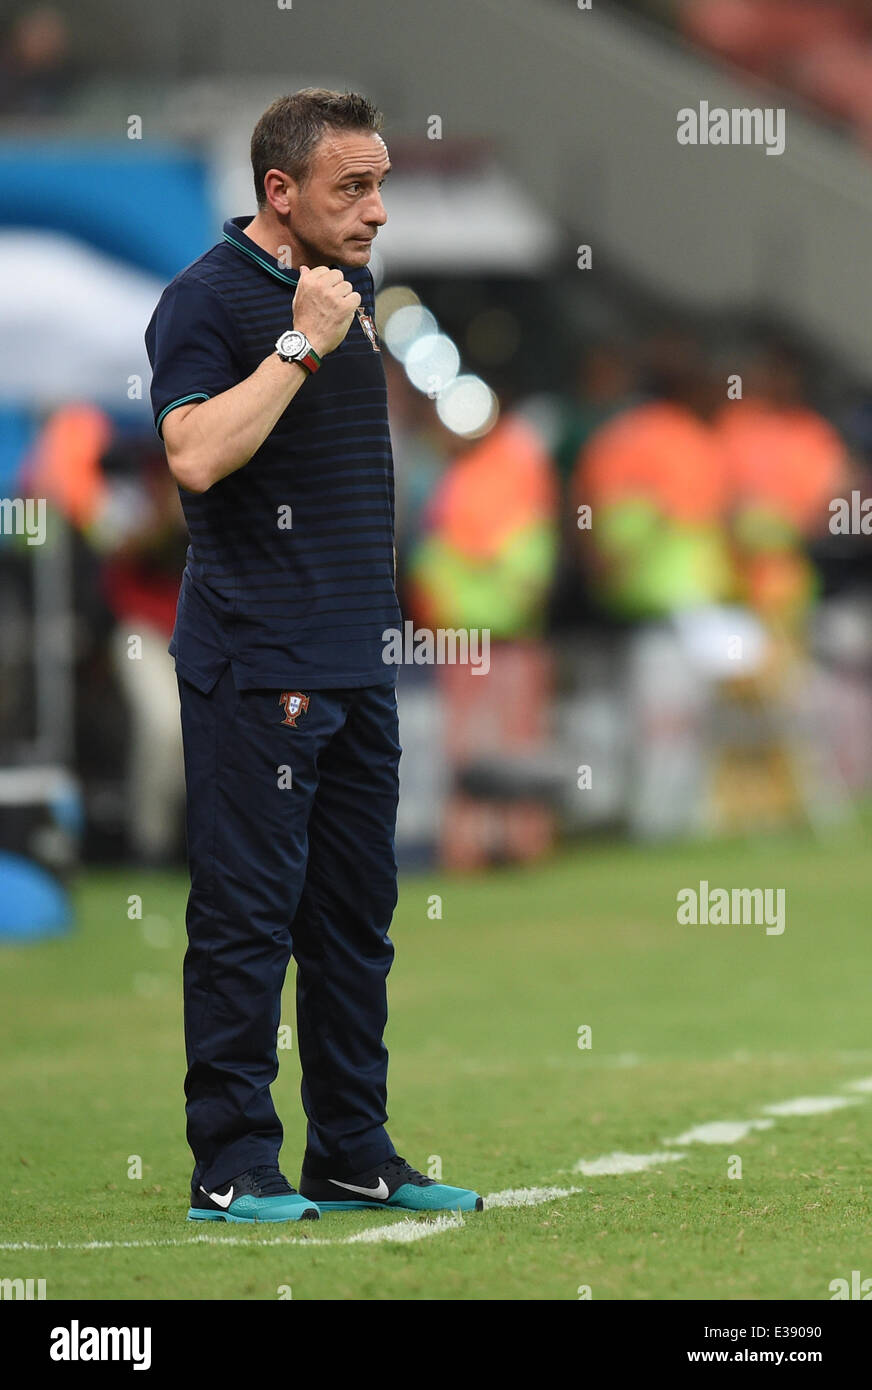 Manaus, Brazil. 22nd June, 2014. Head coach Paulo Bento of Portugal reacts during the FIFA World Cup 2014 group G preliminary round match between the USA and Portugal at the Arena Amazonia Stadium in Manaus, Brazil, 22 June 2014. Photo: Marius Becker/dpa/Alamy Live News Stock Photo